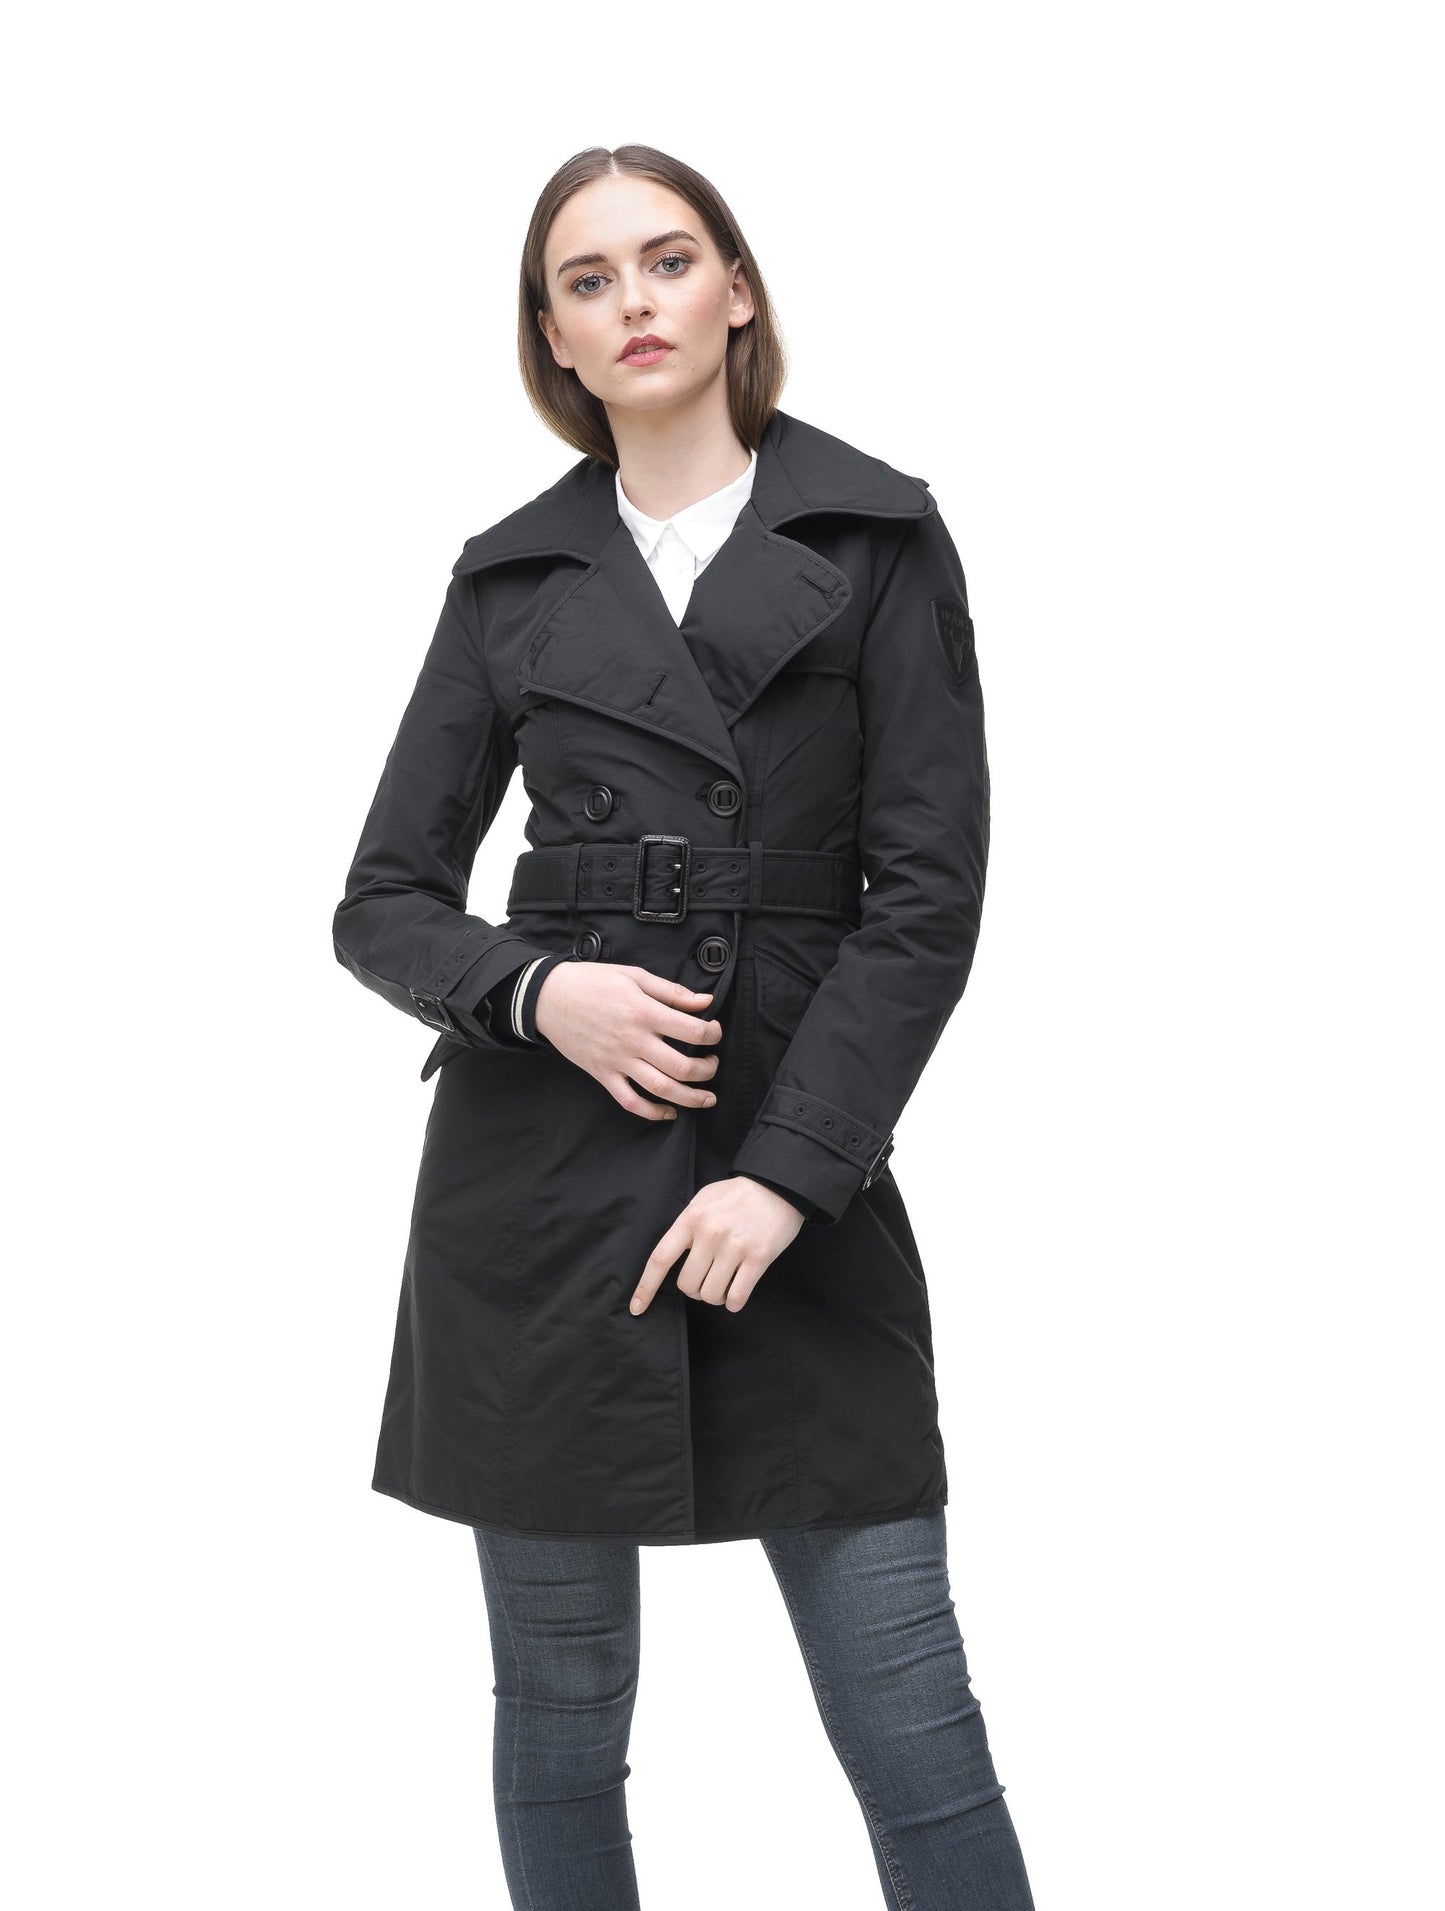 Women's classic trench coat that falls just above the knee in Black